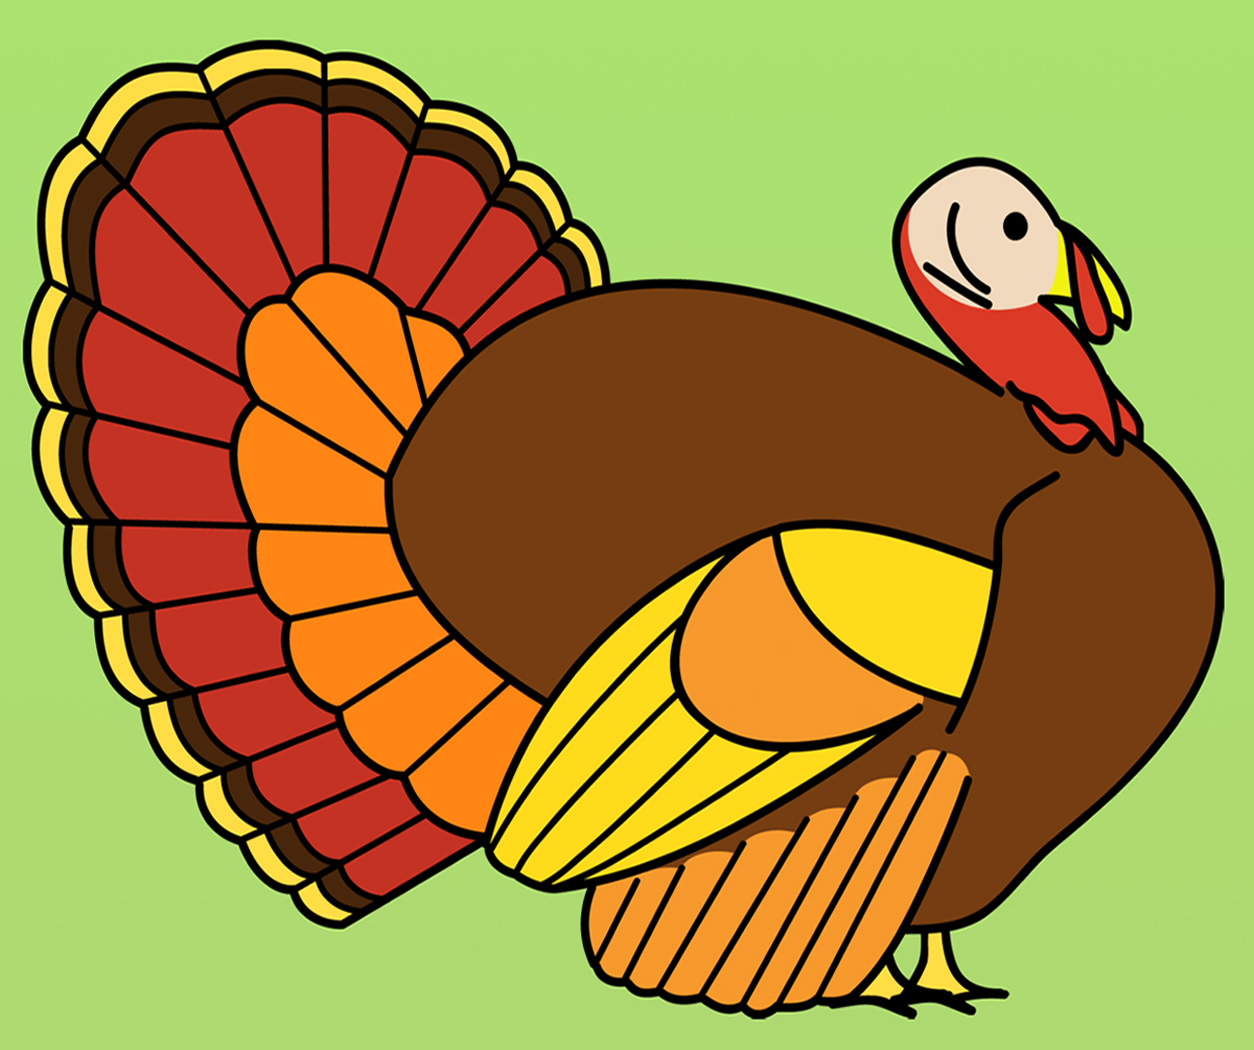 clip art for thanksgiving food drive - photo #40